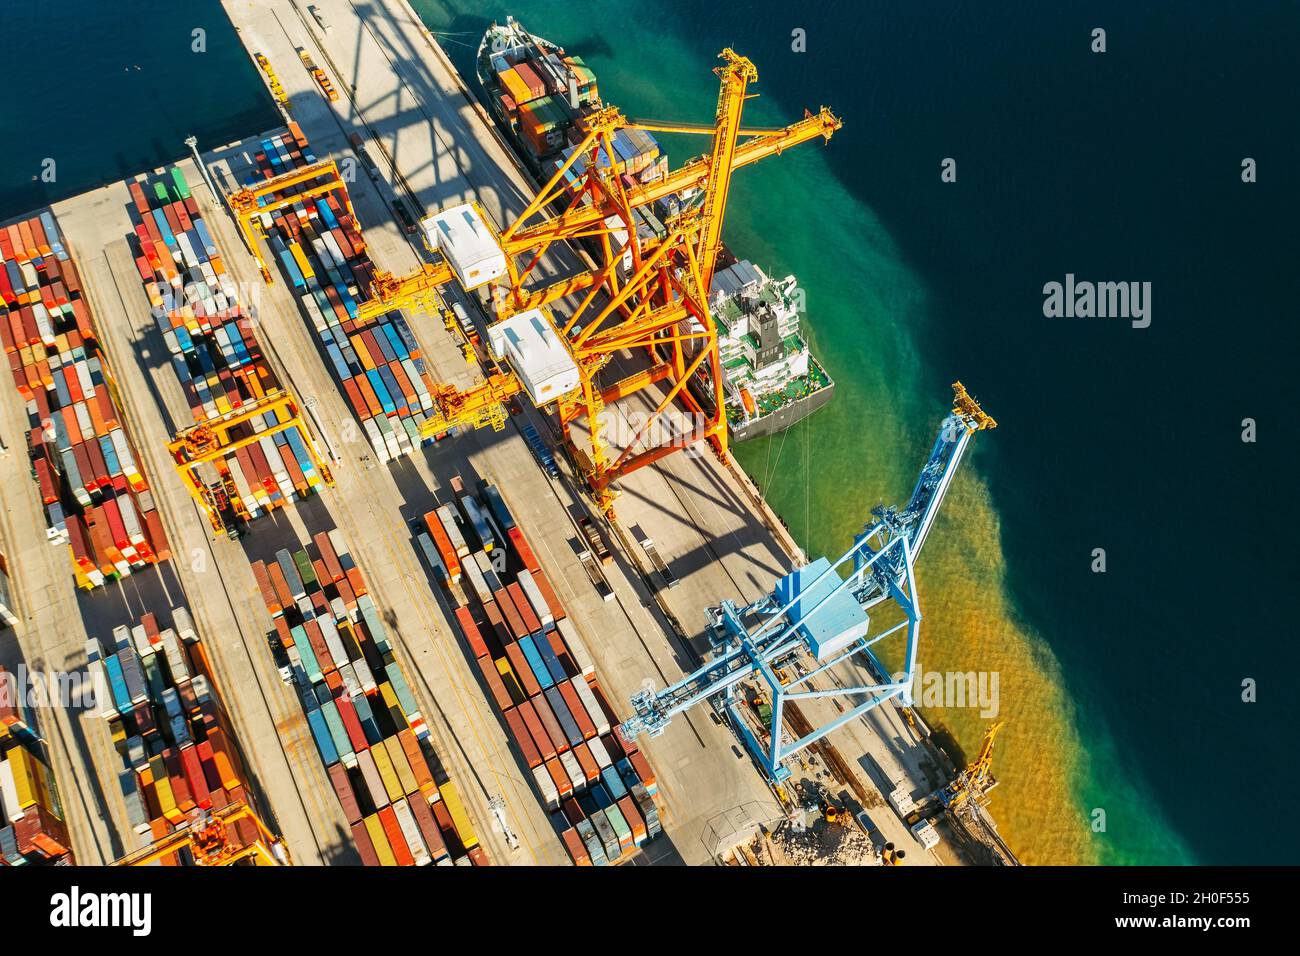 Containers in international shipping dock waiting to import or export and transportation. Top view of loading containers on the ship in the port Stock Photo